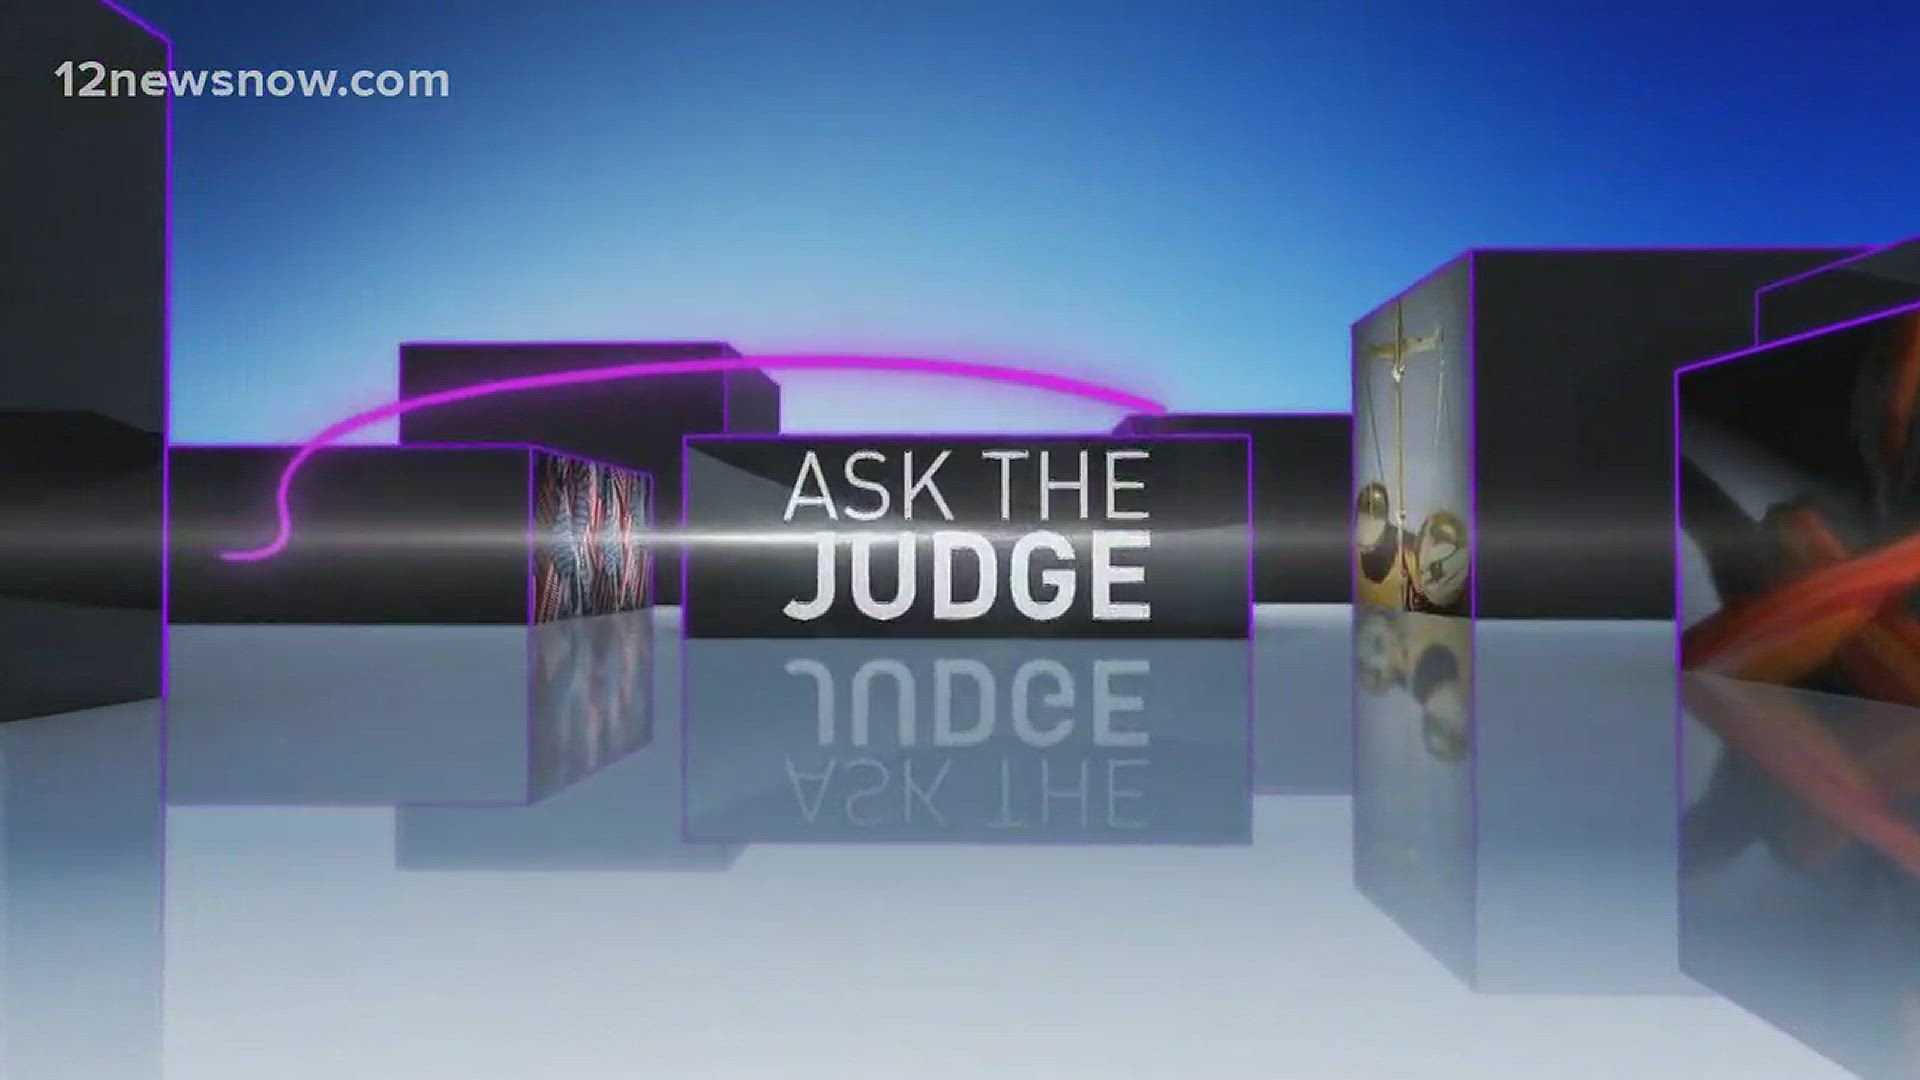 Today on "Ask The Judge", 12News asks Judge Raquel West your questions about traffic tickets, rules single-room-renters should have in their contracts, and keeping a bonus after leaving a work contract.